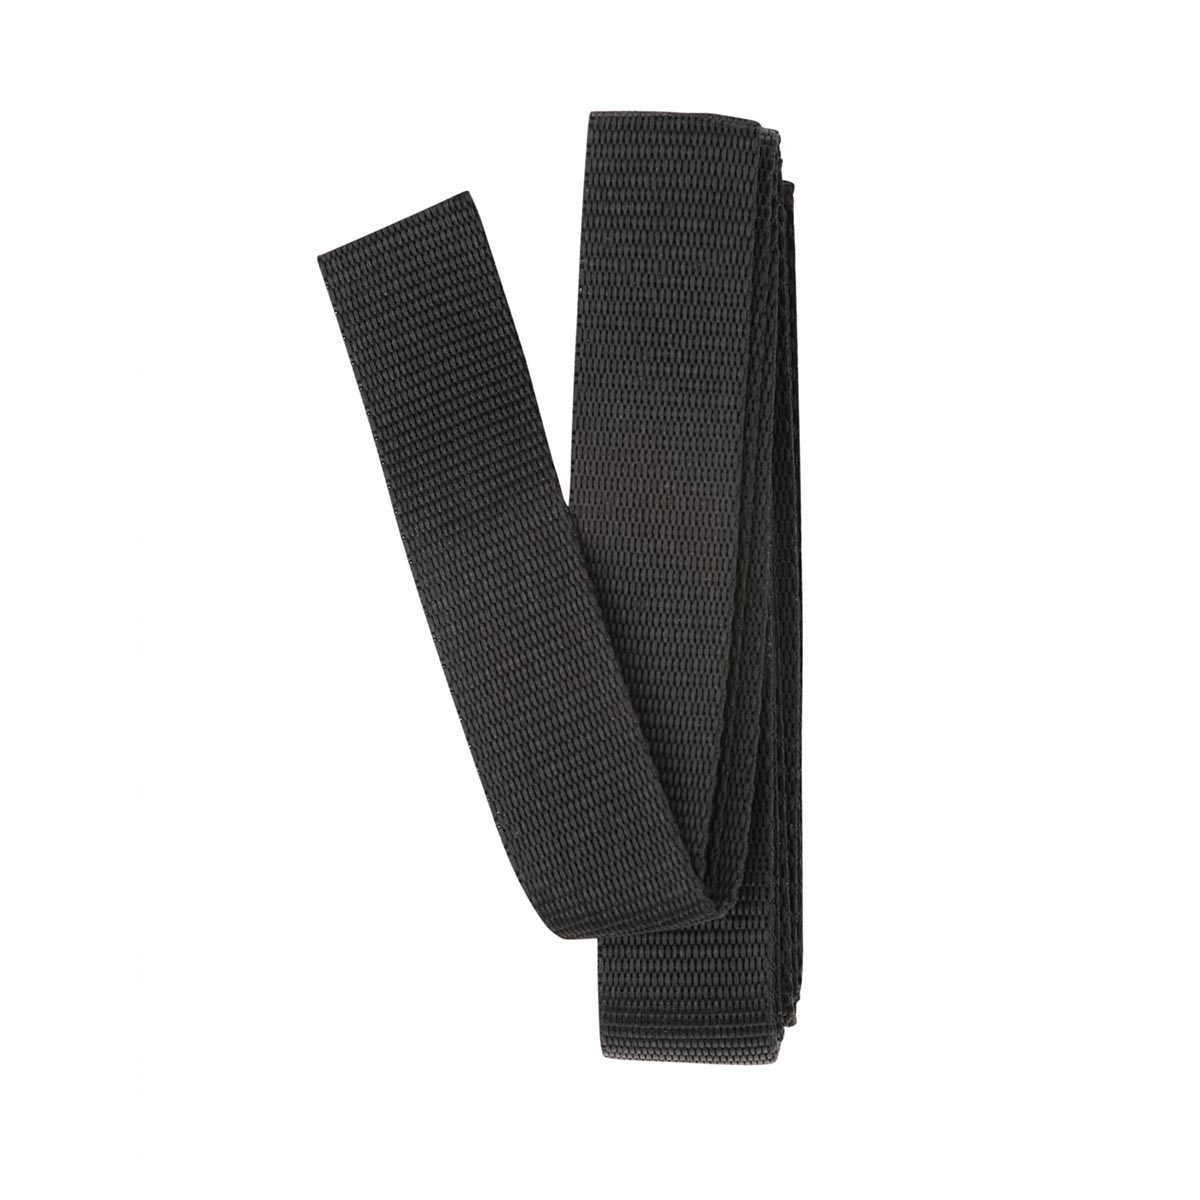 FERRINO - PP WEBBING 25 MM 35 CM WITH DB BUCKLE (2 PIECES)